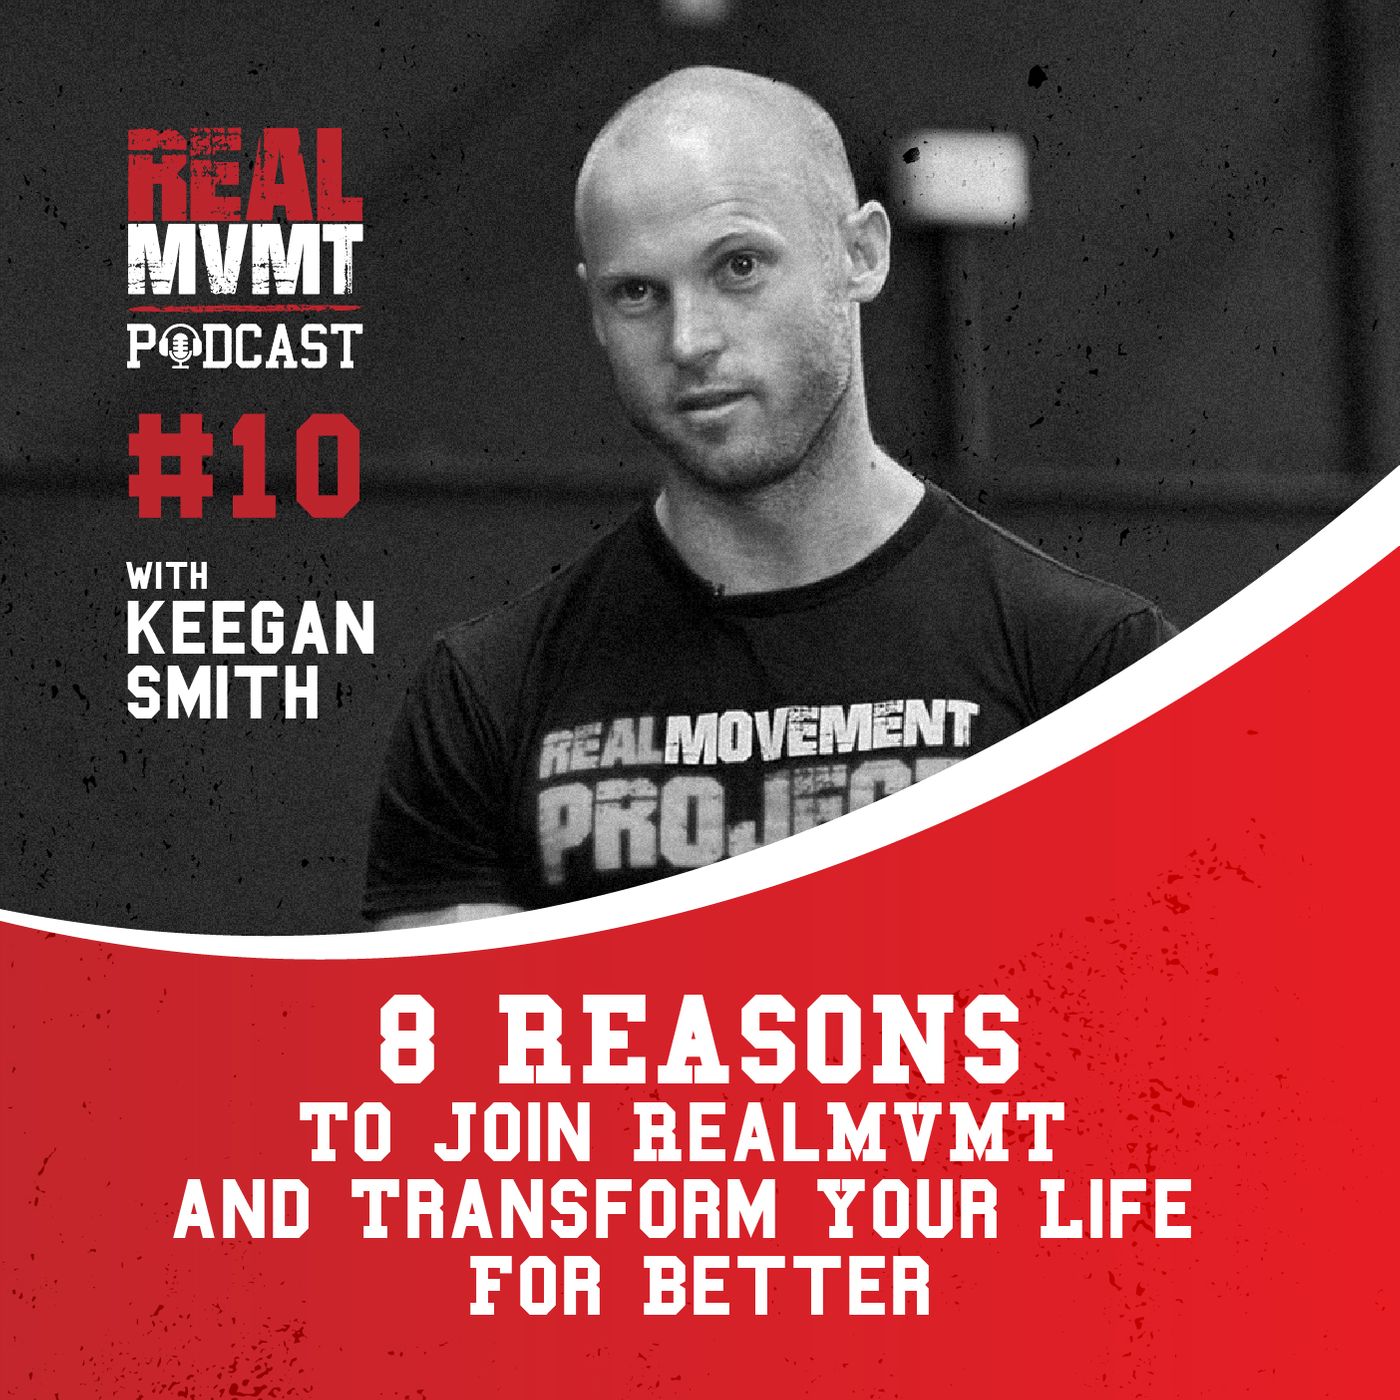 8 Reasons To Join RealMVMT & Transform Your Life For Better - Keegan Smith